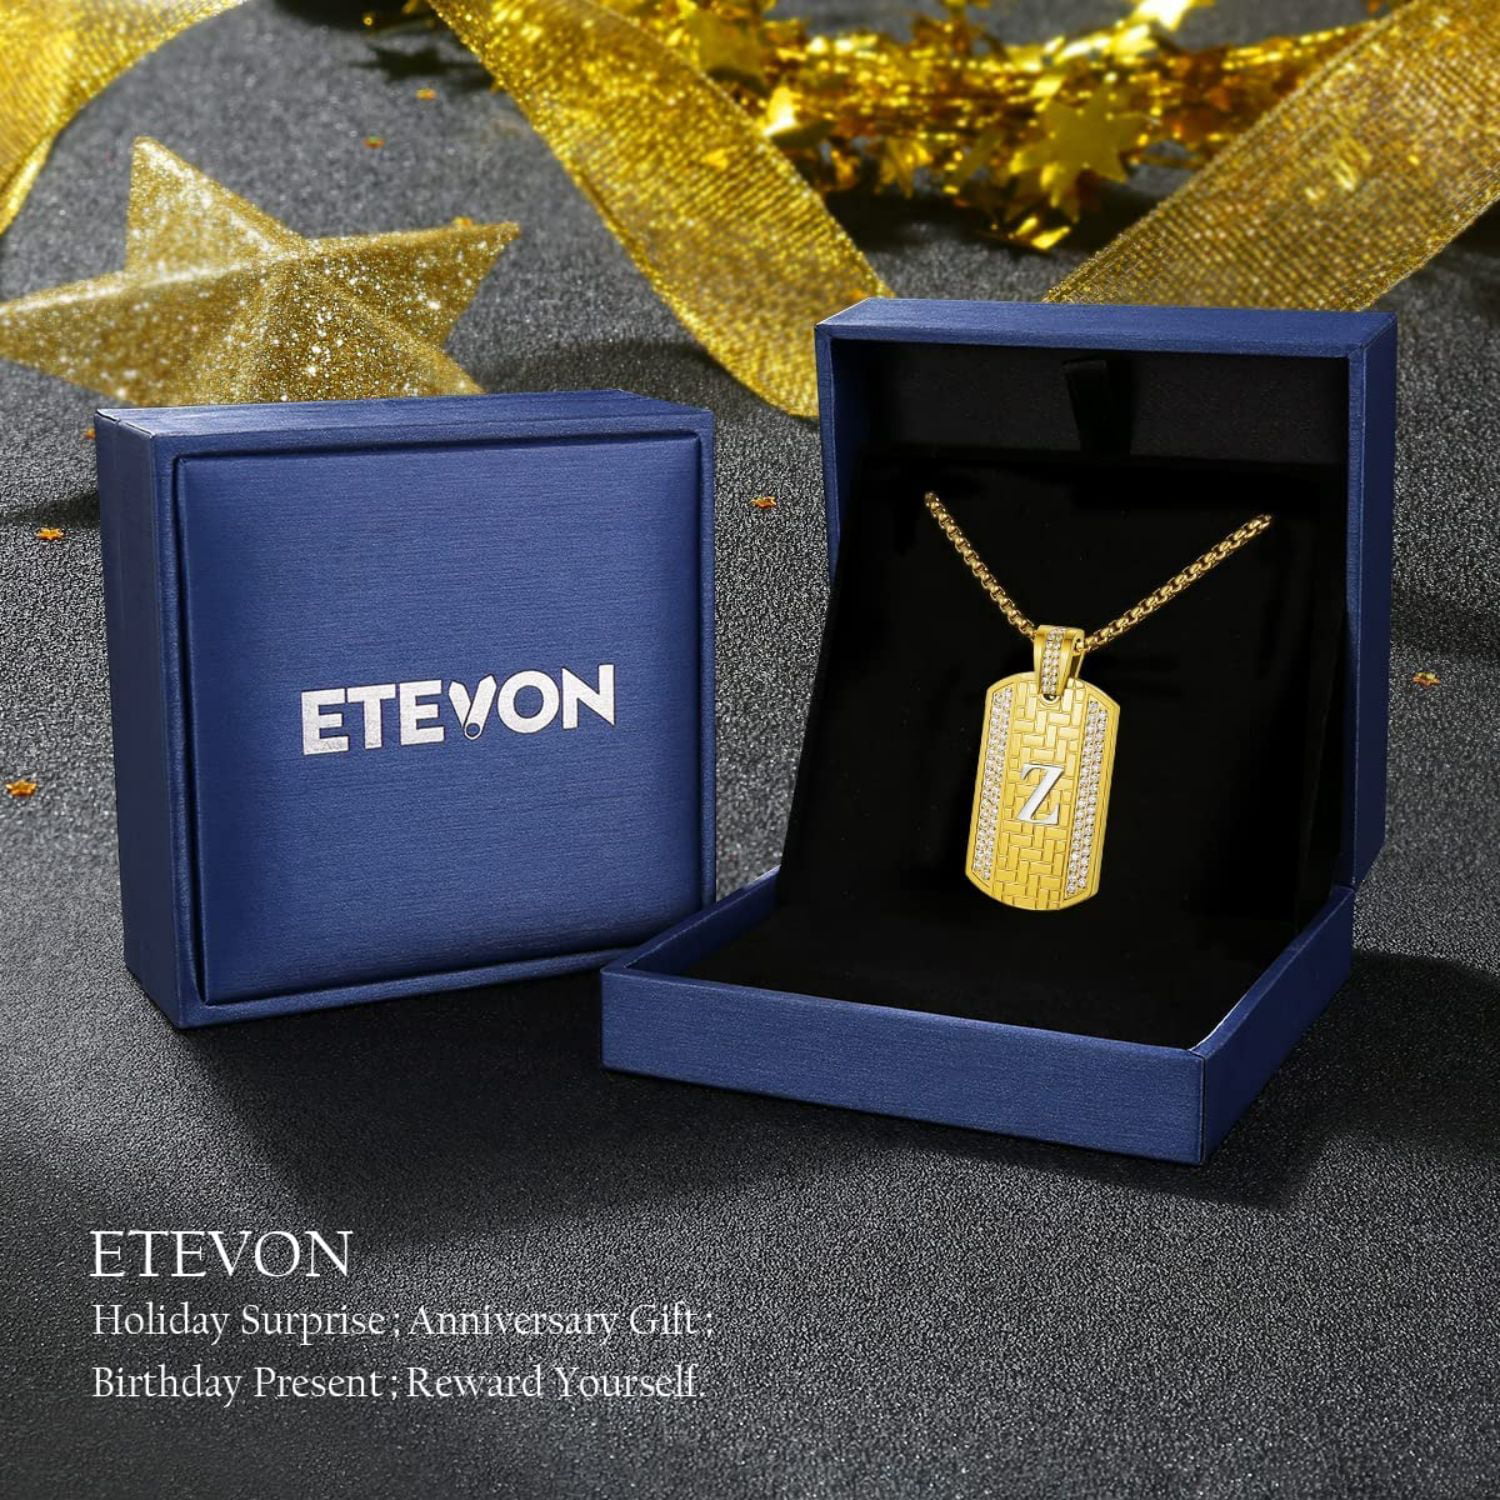 Gold Stainless Steel Letter Pendant Necklaces Hip Hop Diamond Square Chain Jewelry Gifts for Men Women Boys Christmas Birthday Gifts for Husband Boyfriend Son ETEVON 18K Gold Plated Initial Necklace 